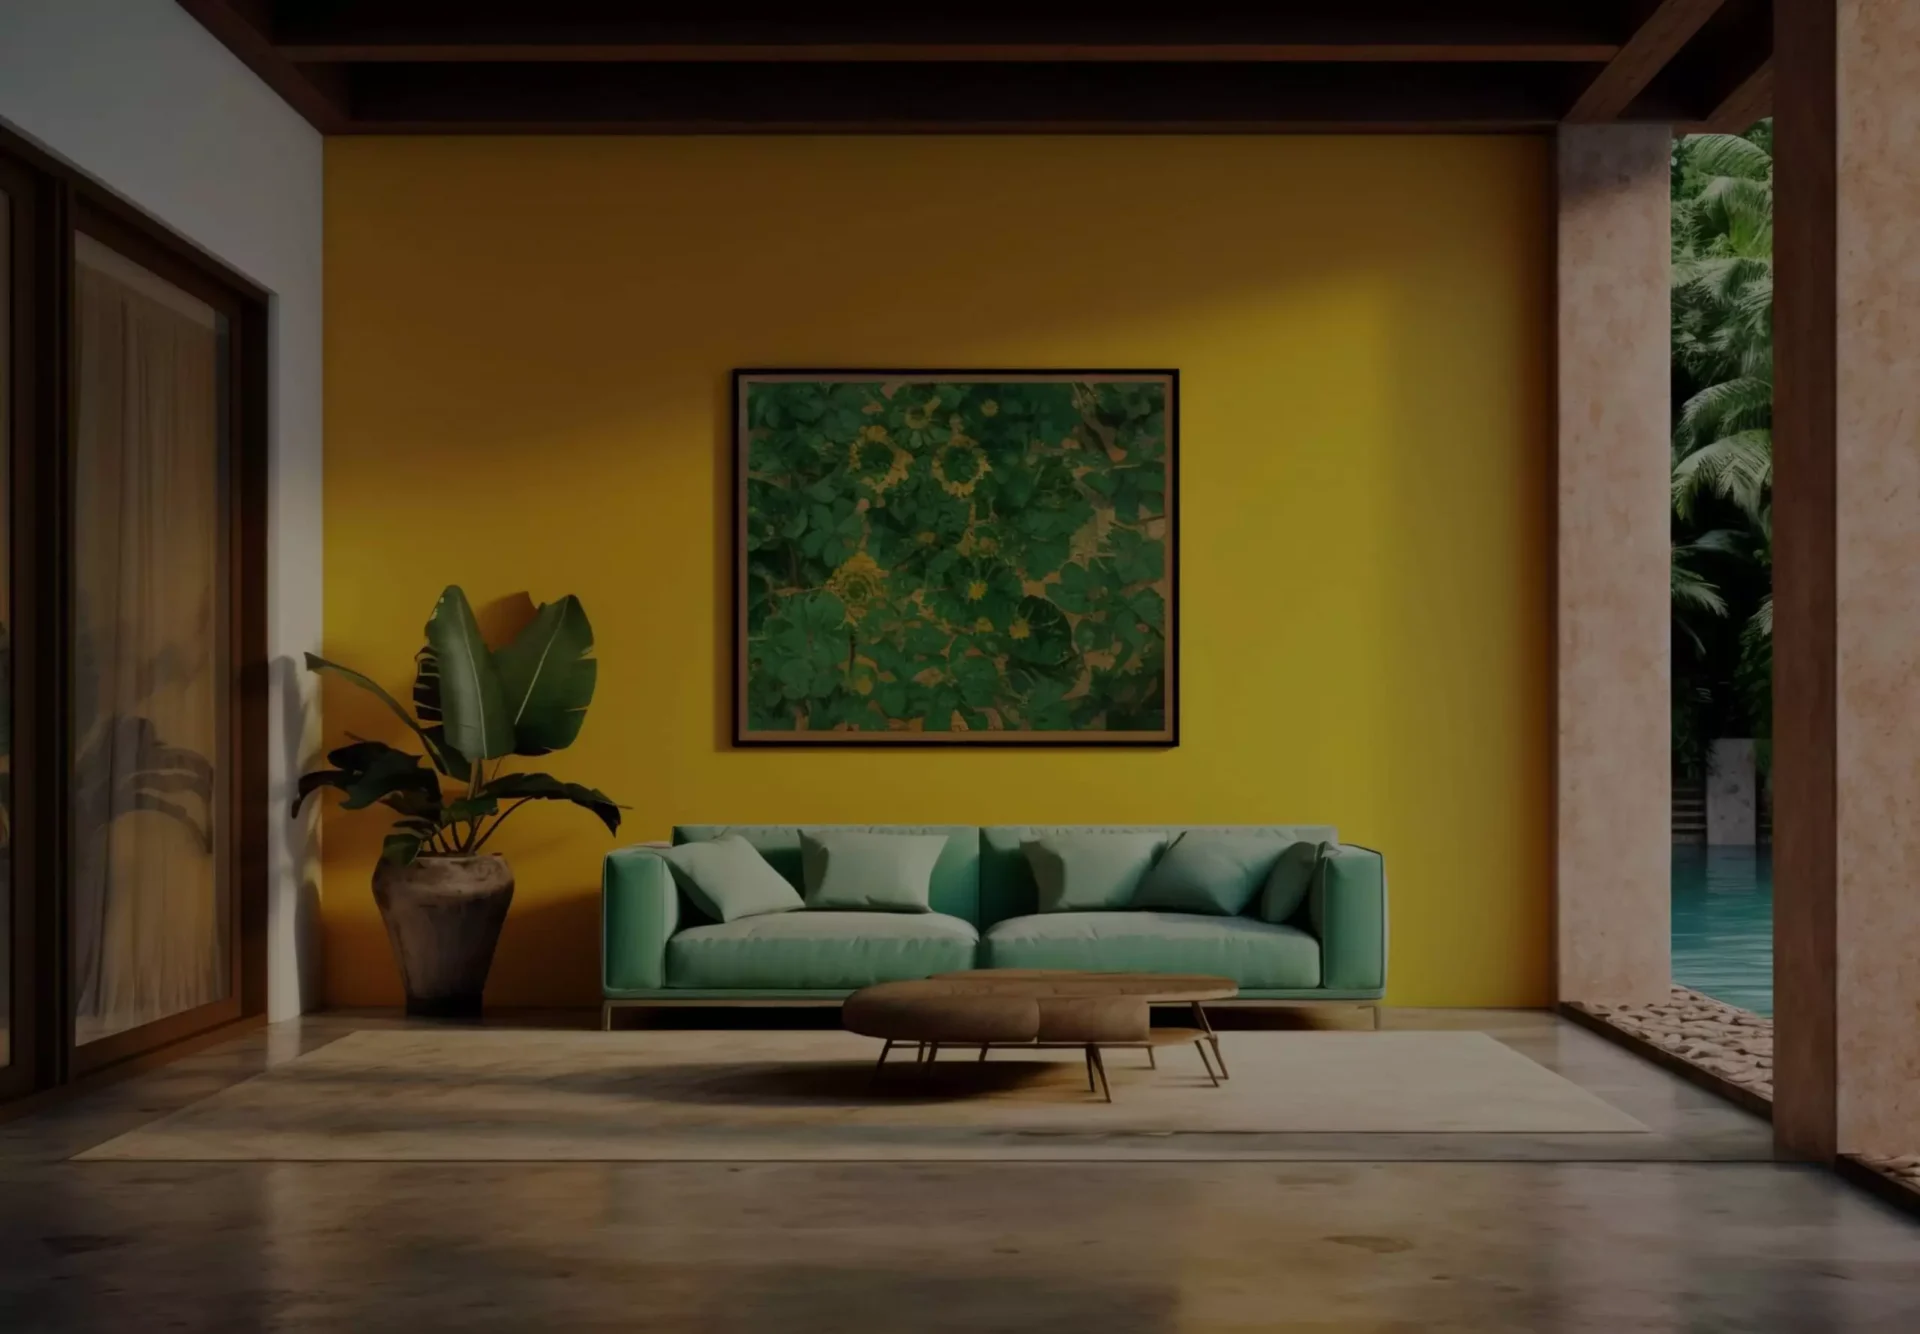 A green couch sitting in front of a yellow wall.